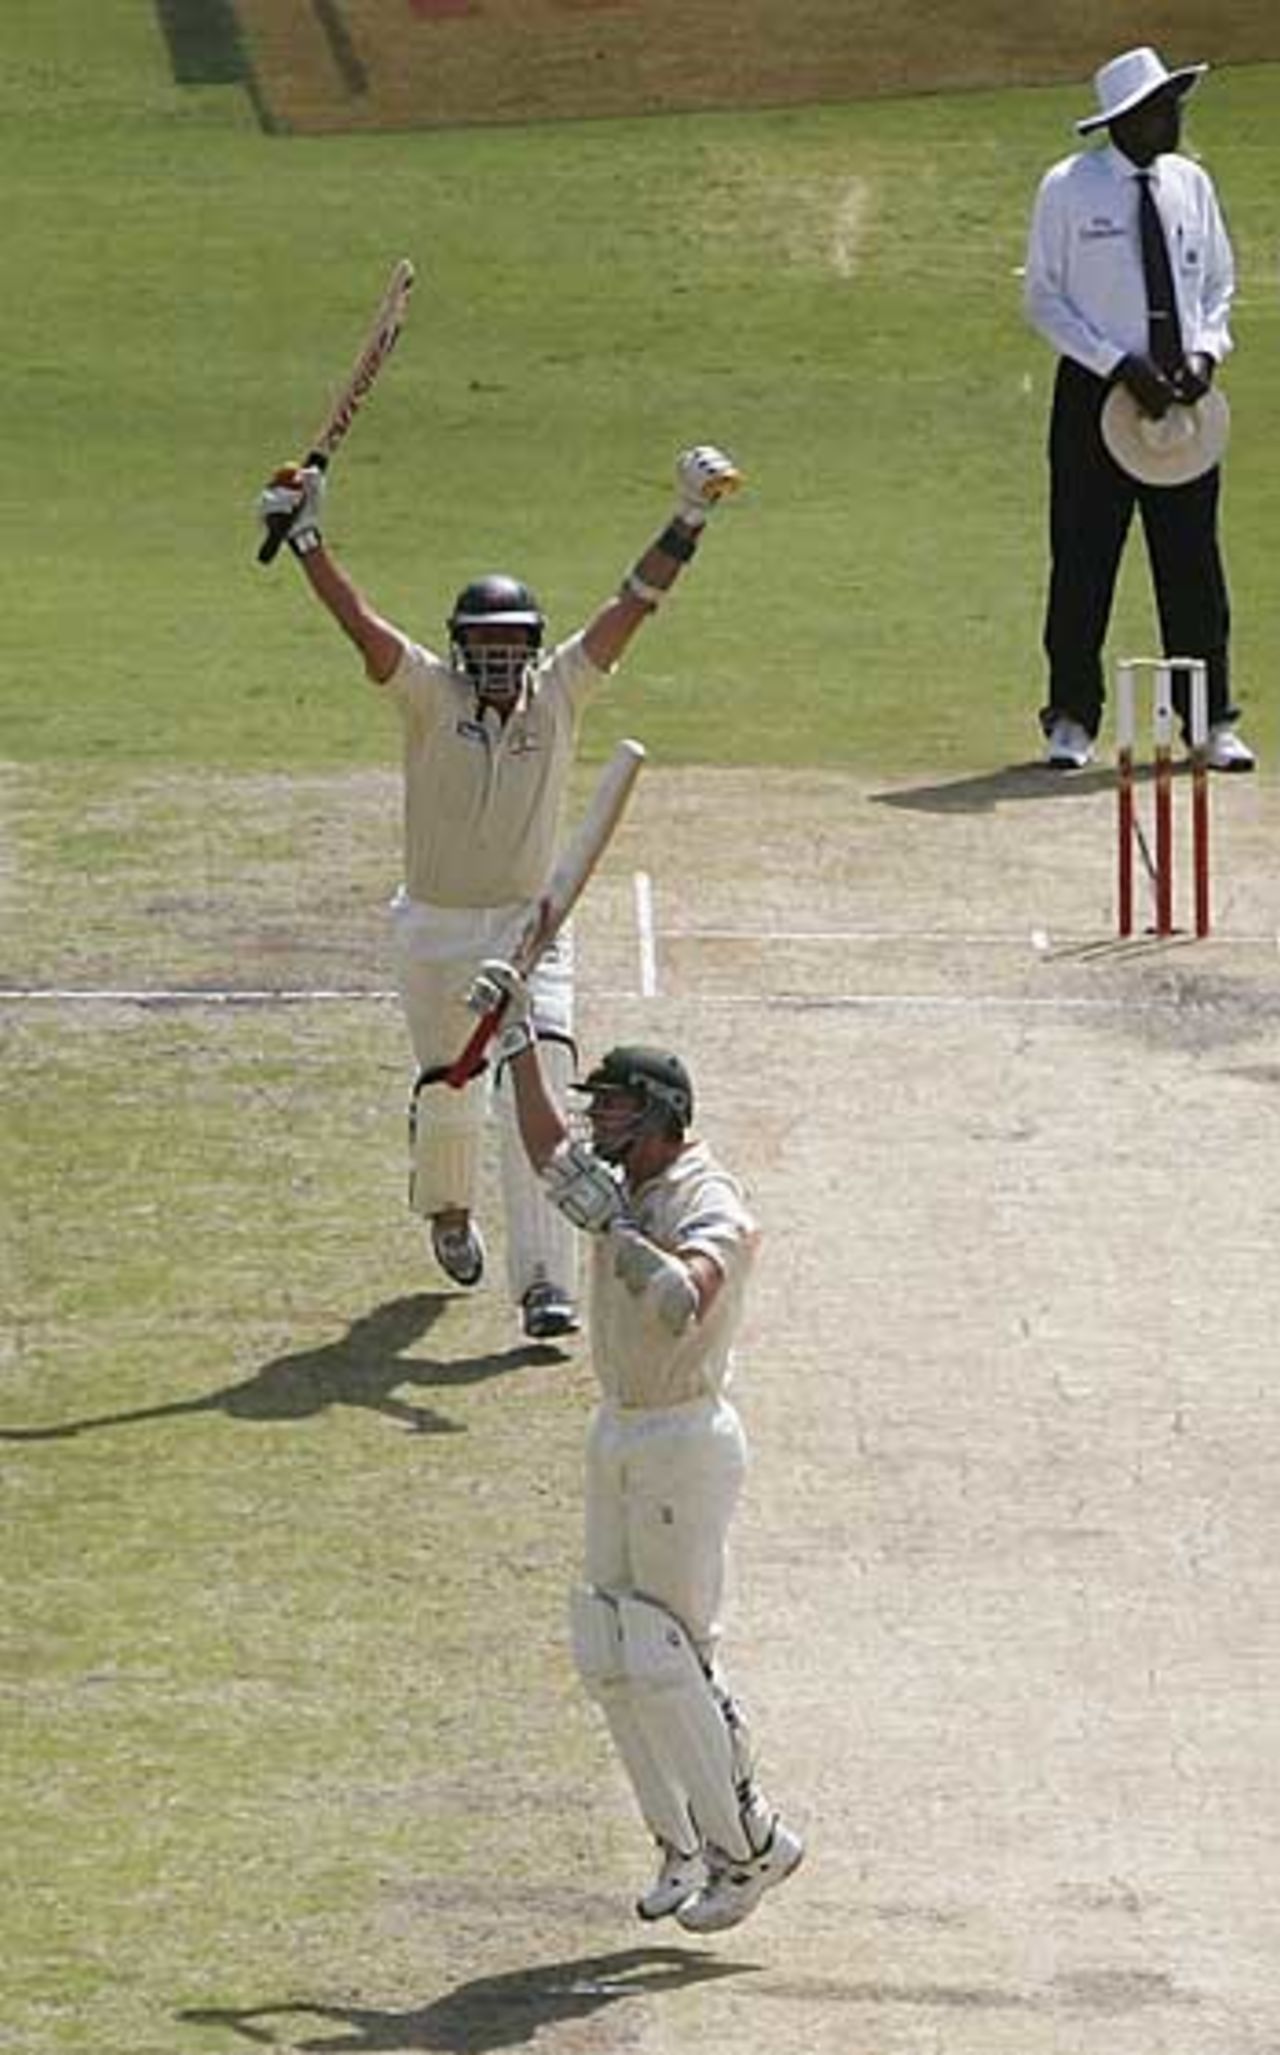 Arms aloft, Michael Kasprowicz and Brett Lee celebrate victory by two wickets, South Africa v Australia, 3rd Test, Johannesburg, 5th day, April 4, 2006